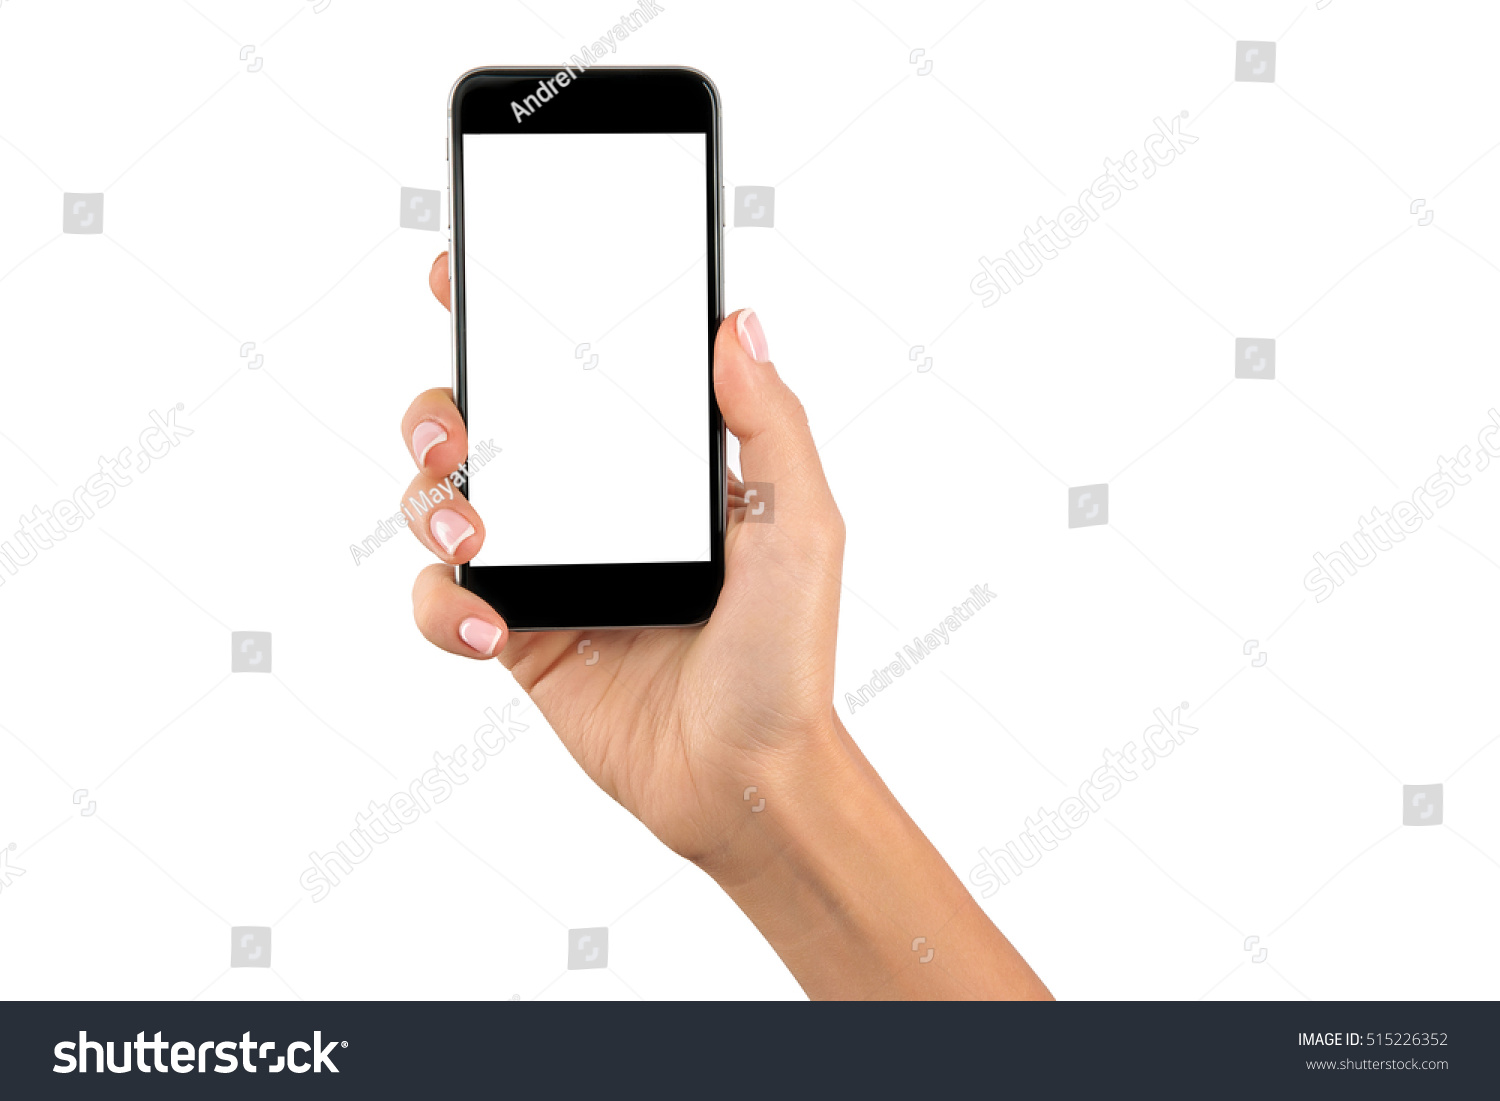 Female hand holding black cellphone with white screen at isolated background. #515226352